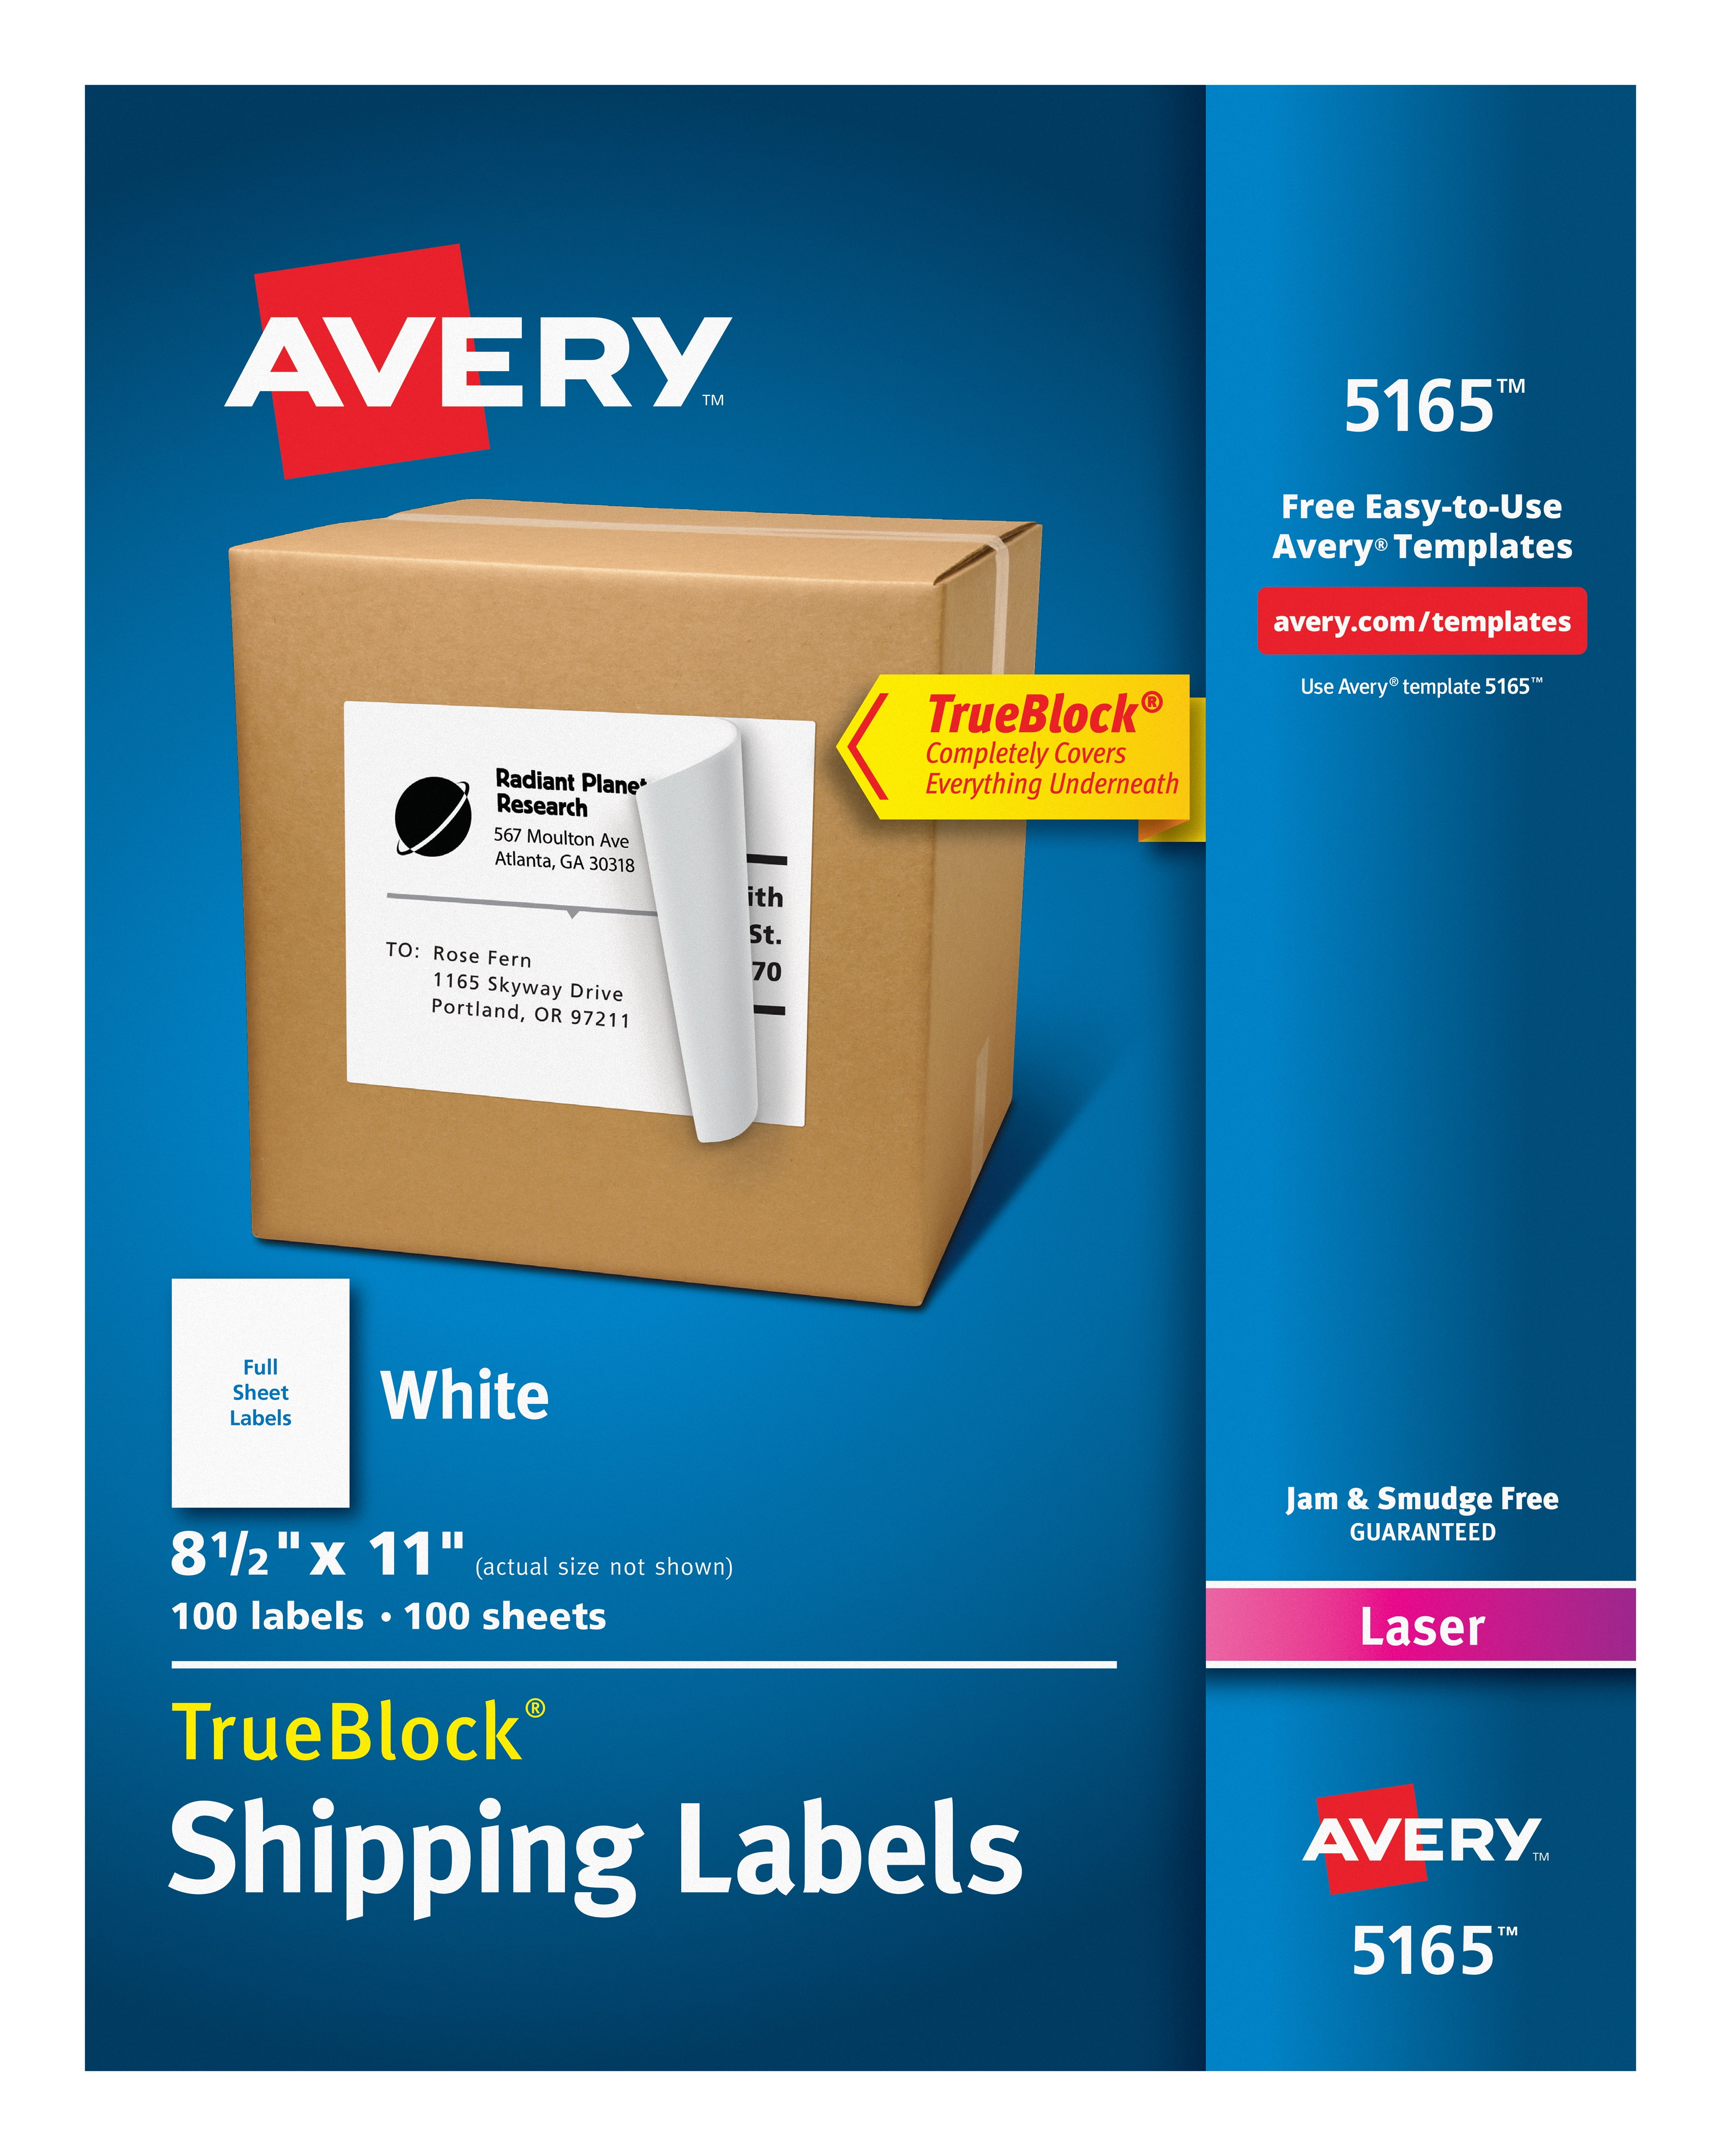 Full Sheet 100 Sheets Premium Label Supply 8.5 x 11 Shipping Labels 100 Labels 